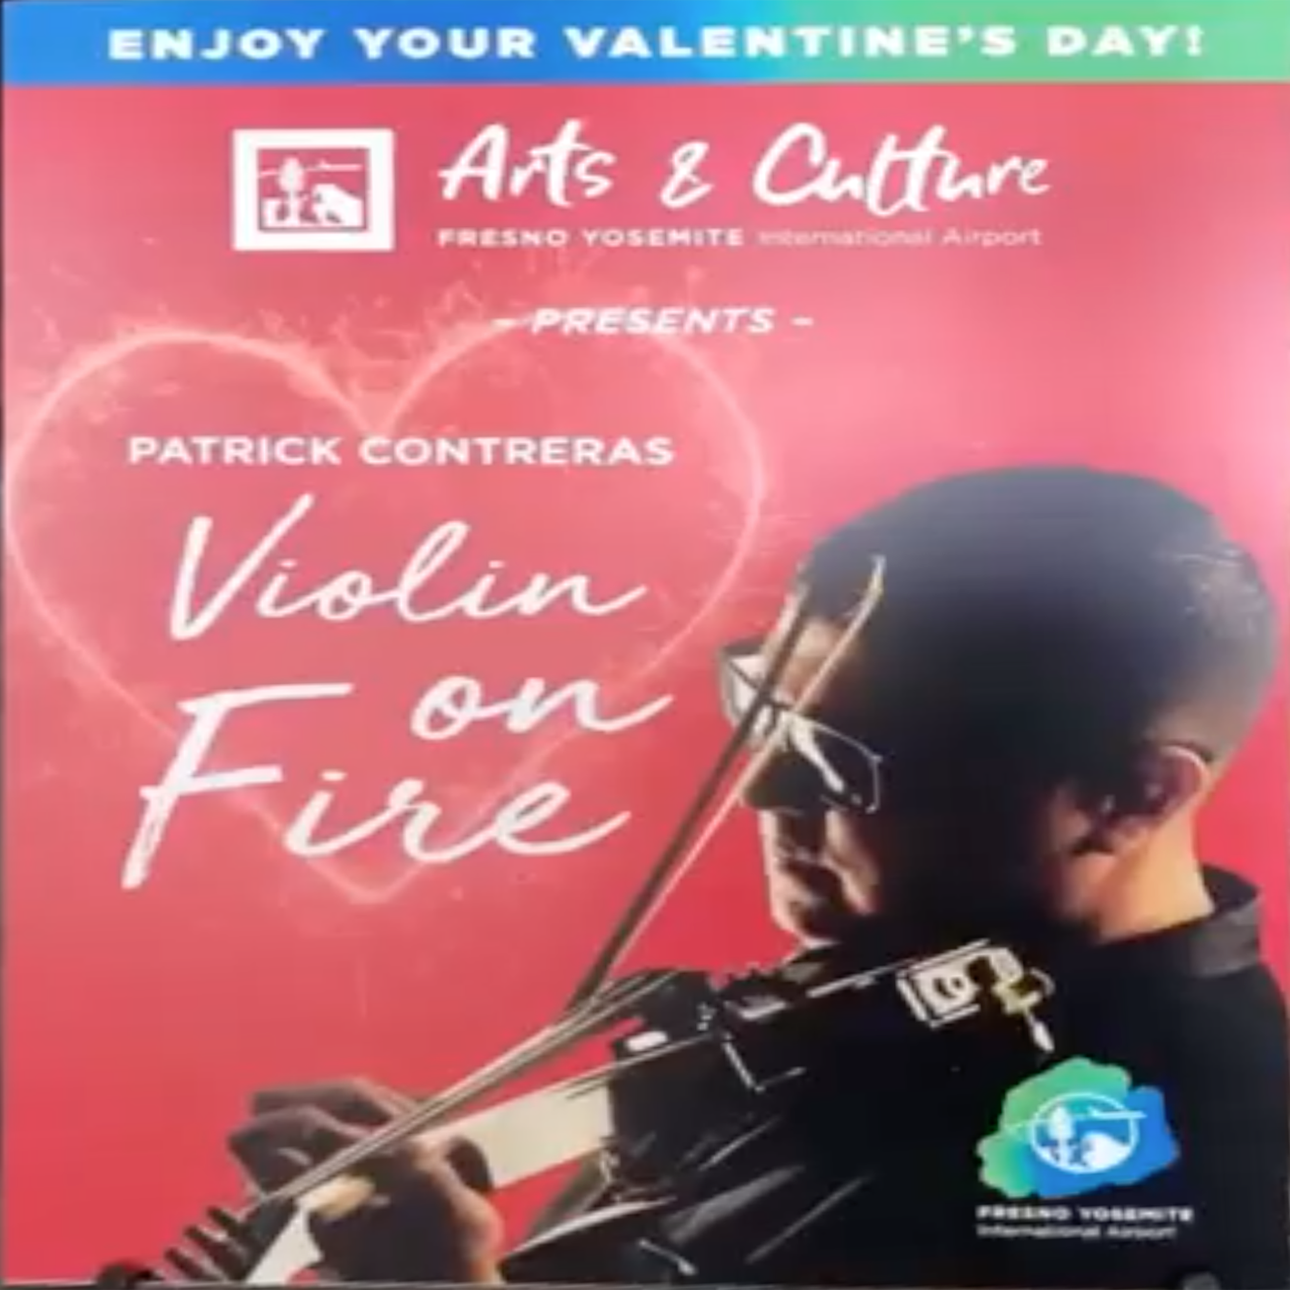 Violin on fire poster